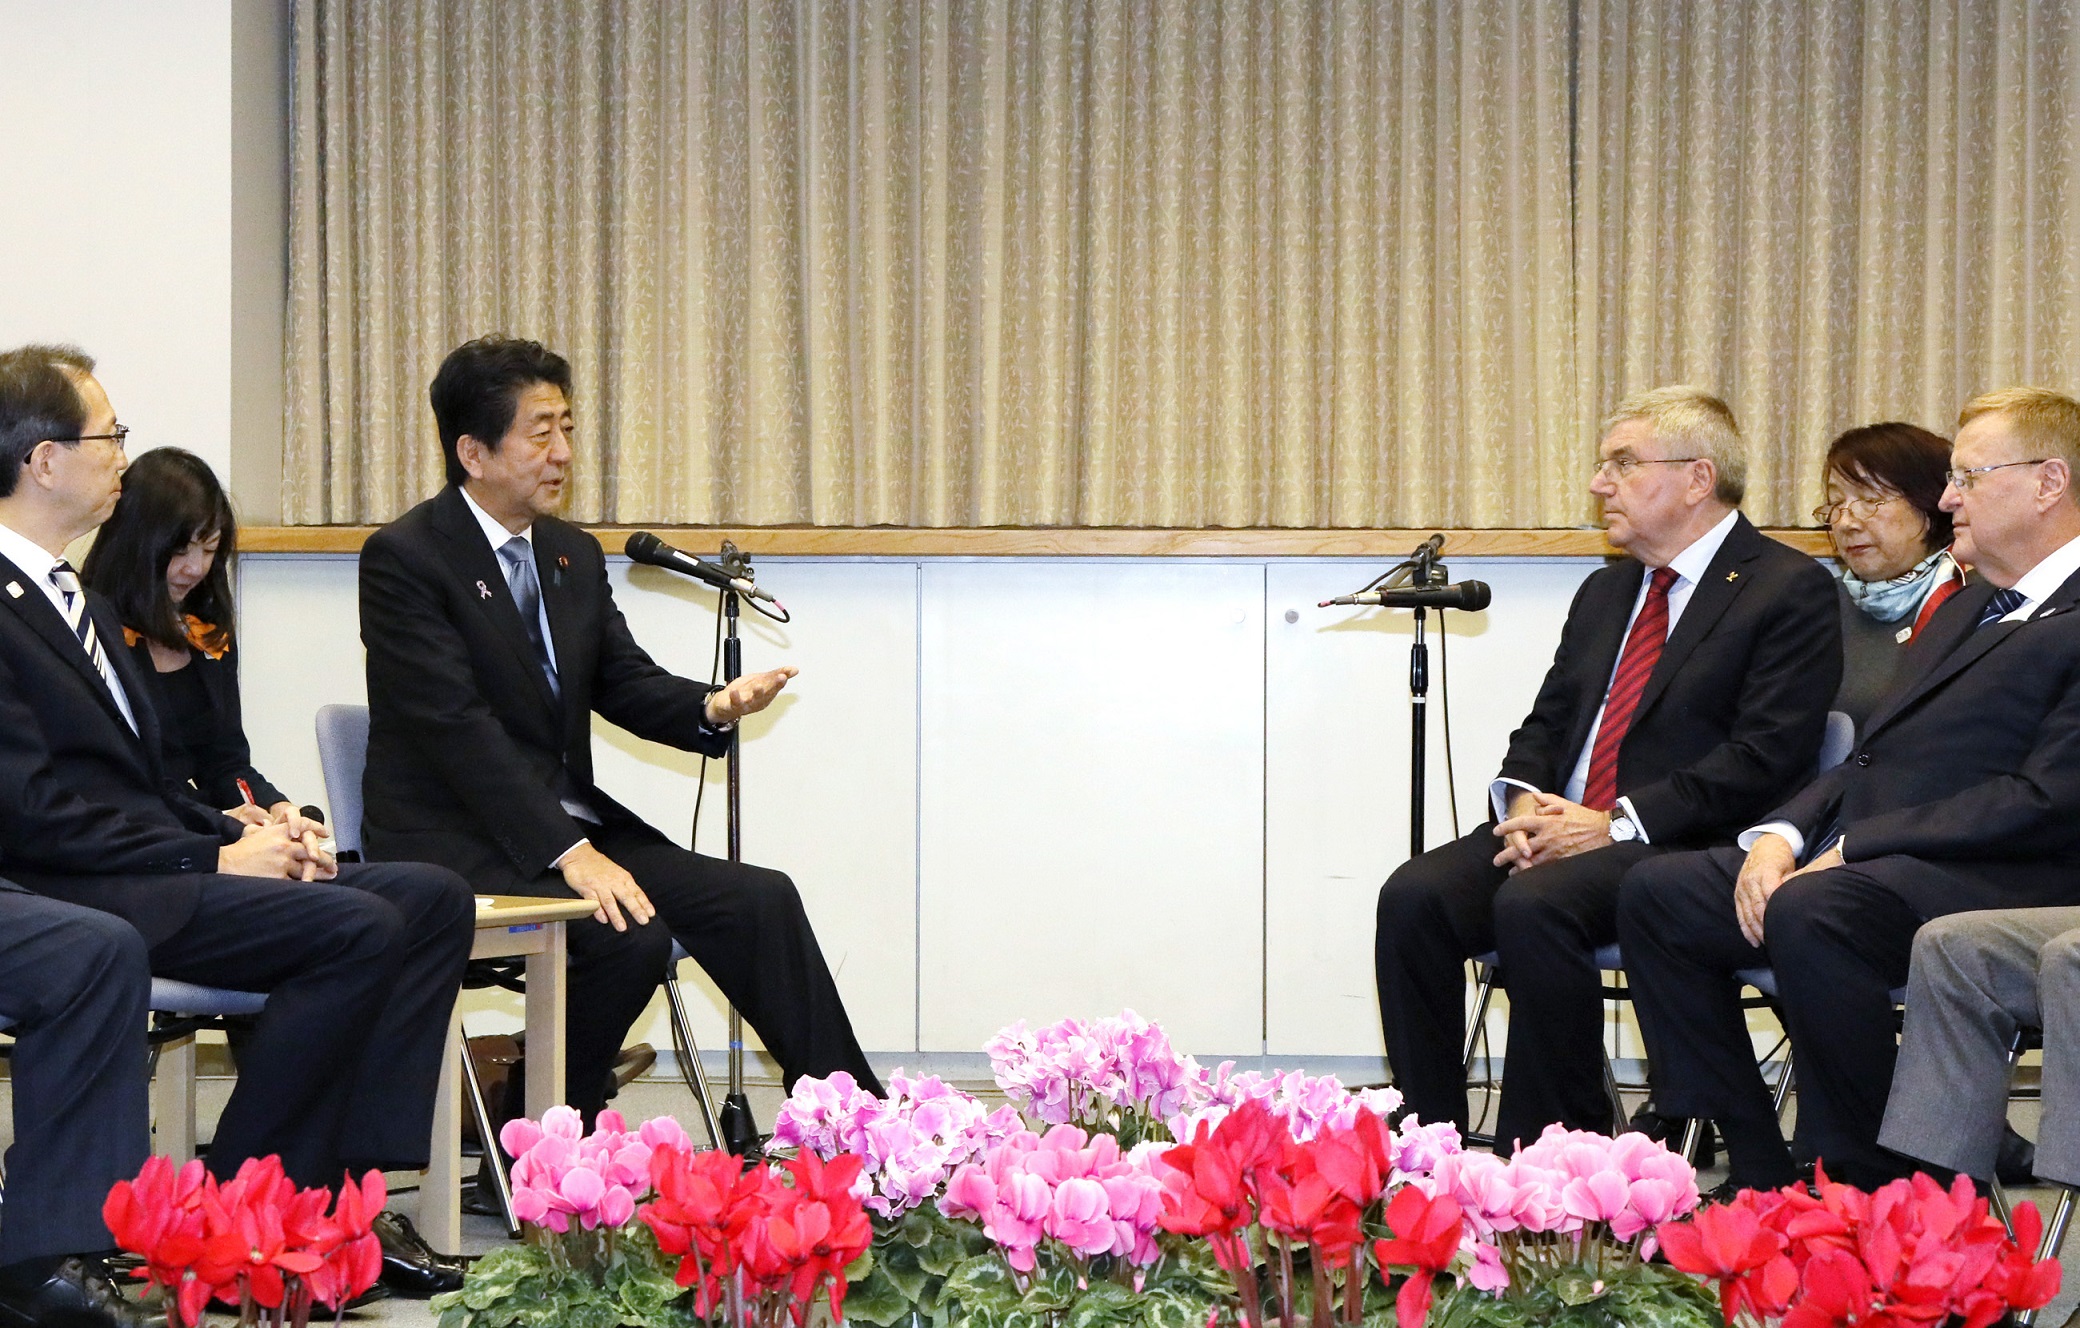 Photograph of the Prime Minister meeting with the President of the IOC